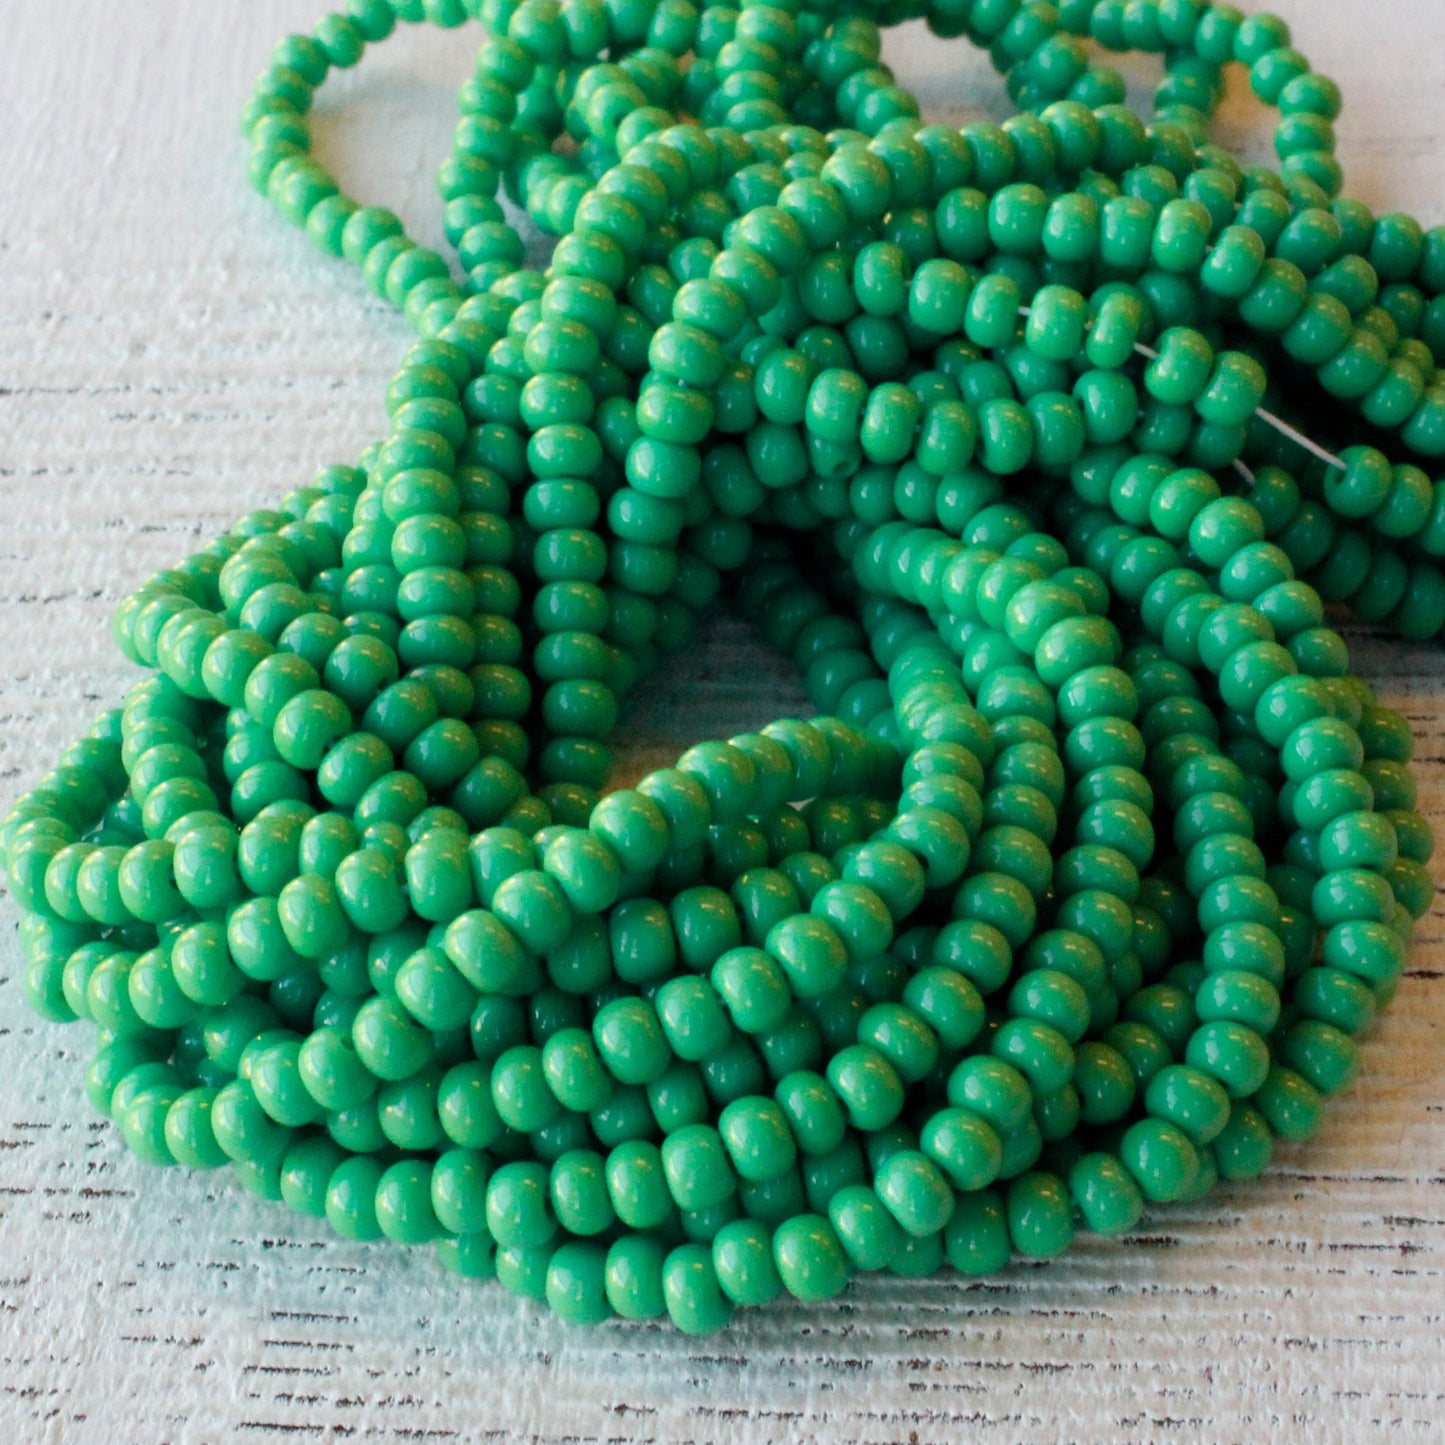 Size 6 Seed Beads - Green - Choose Amount